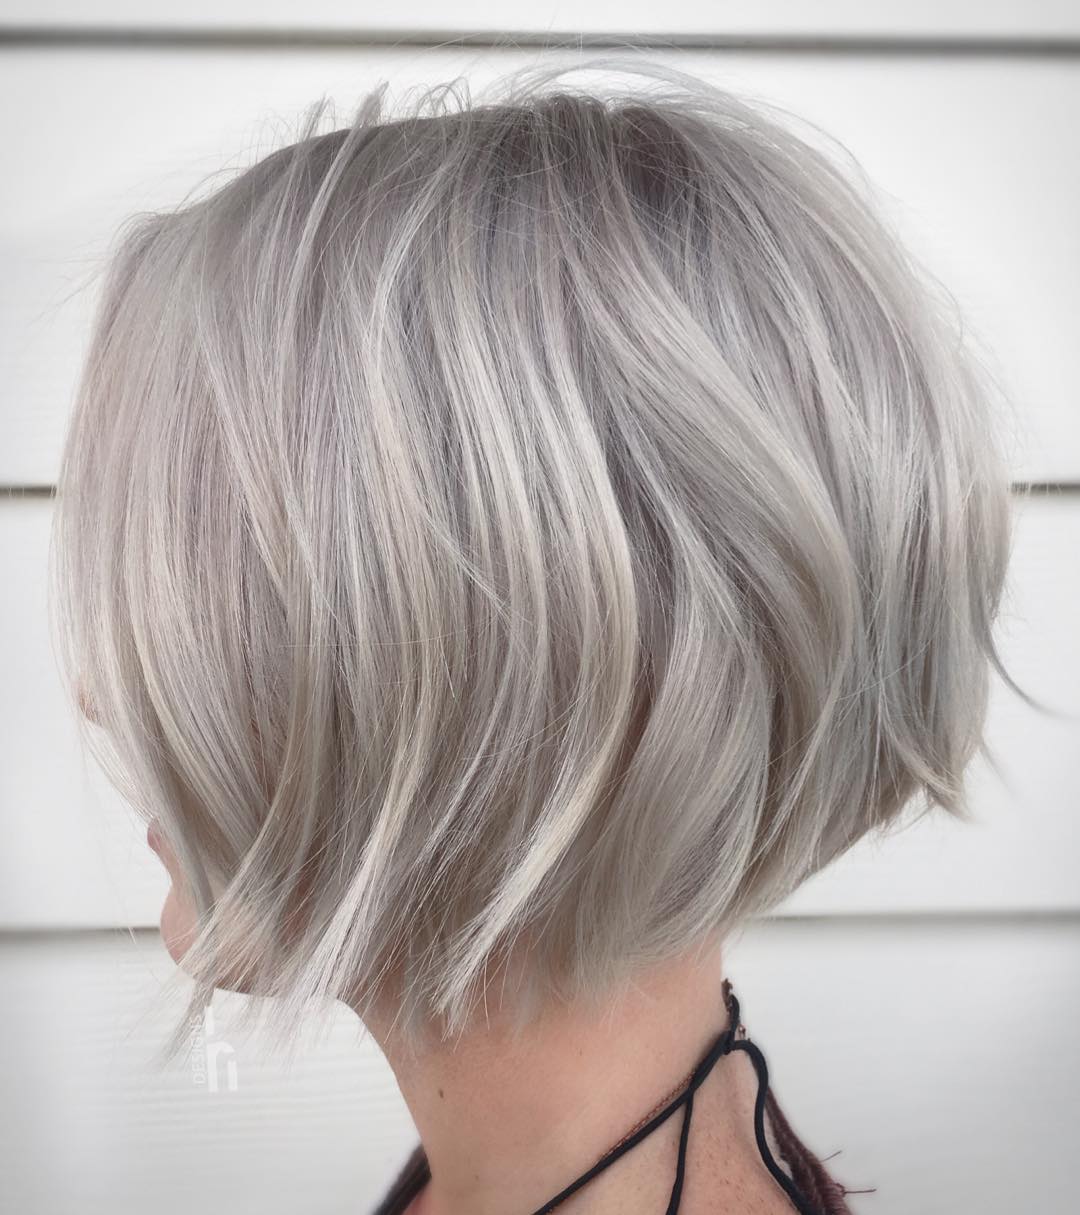 Medium Bob Hairstyles 2019 For Women's And Teens 4